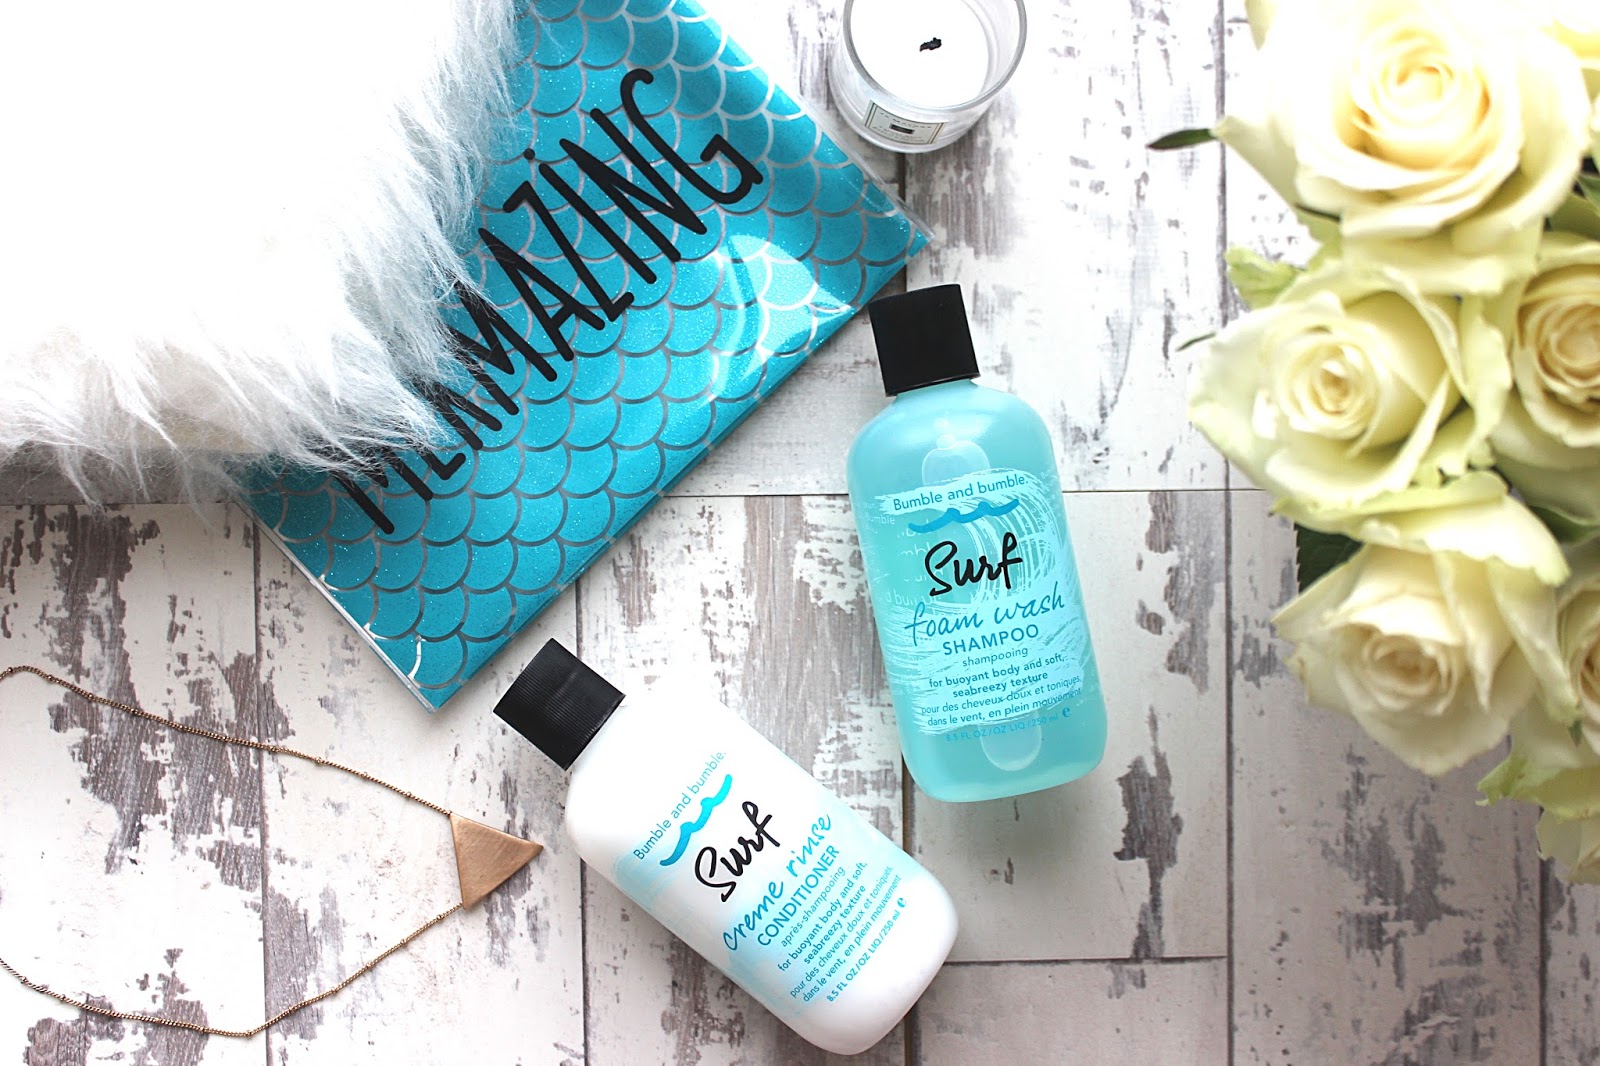 Bumble and bumble Surf shampoo and conditioner 